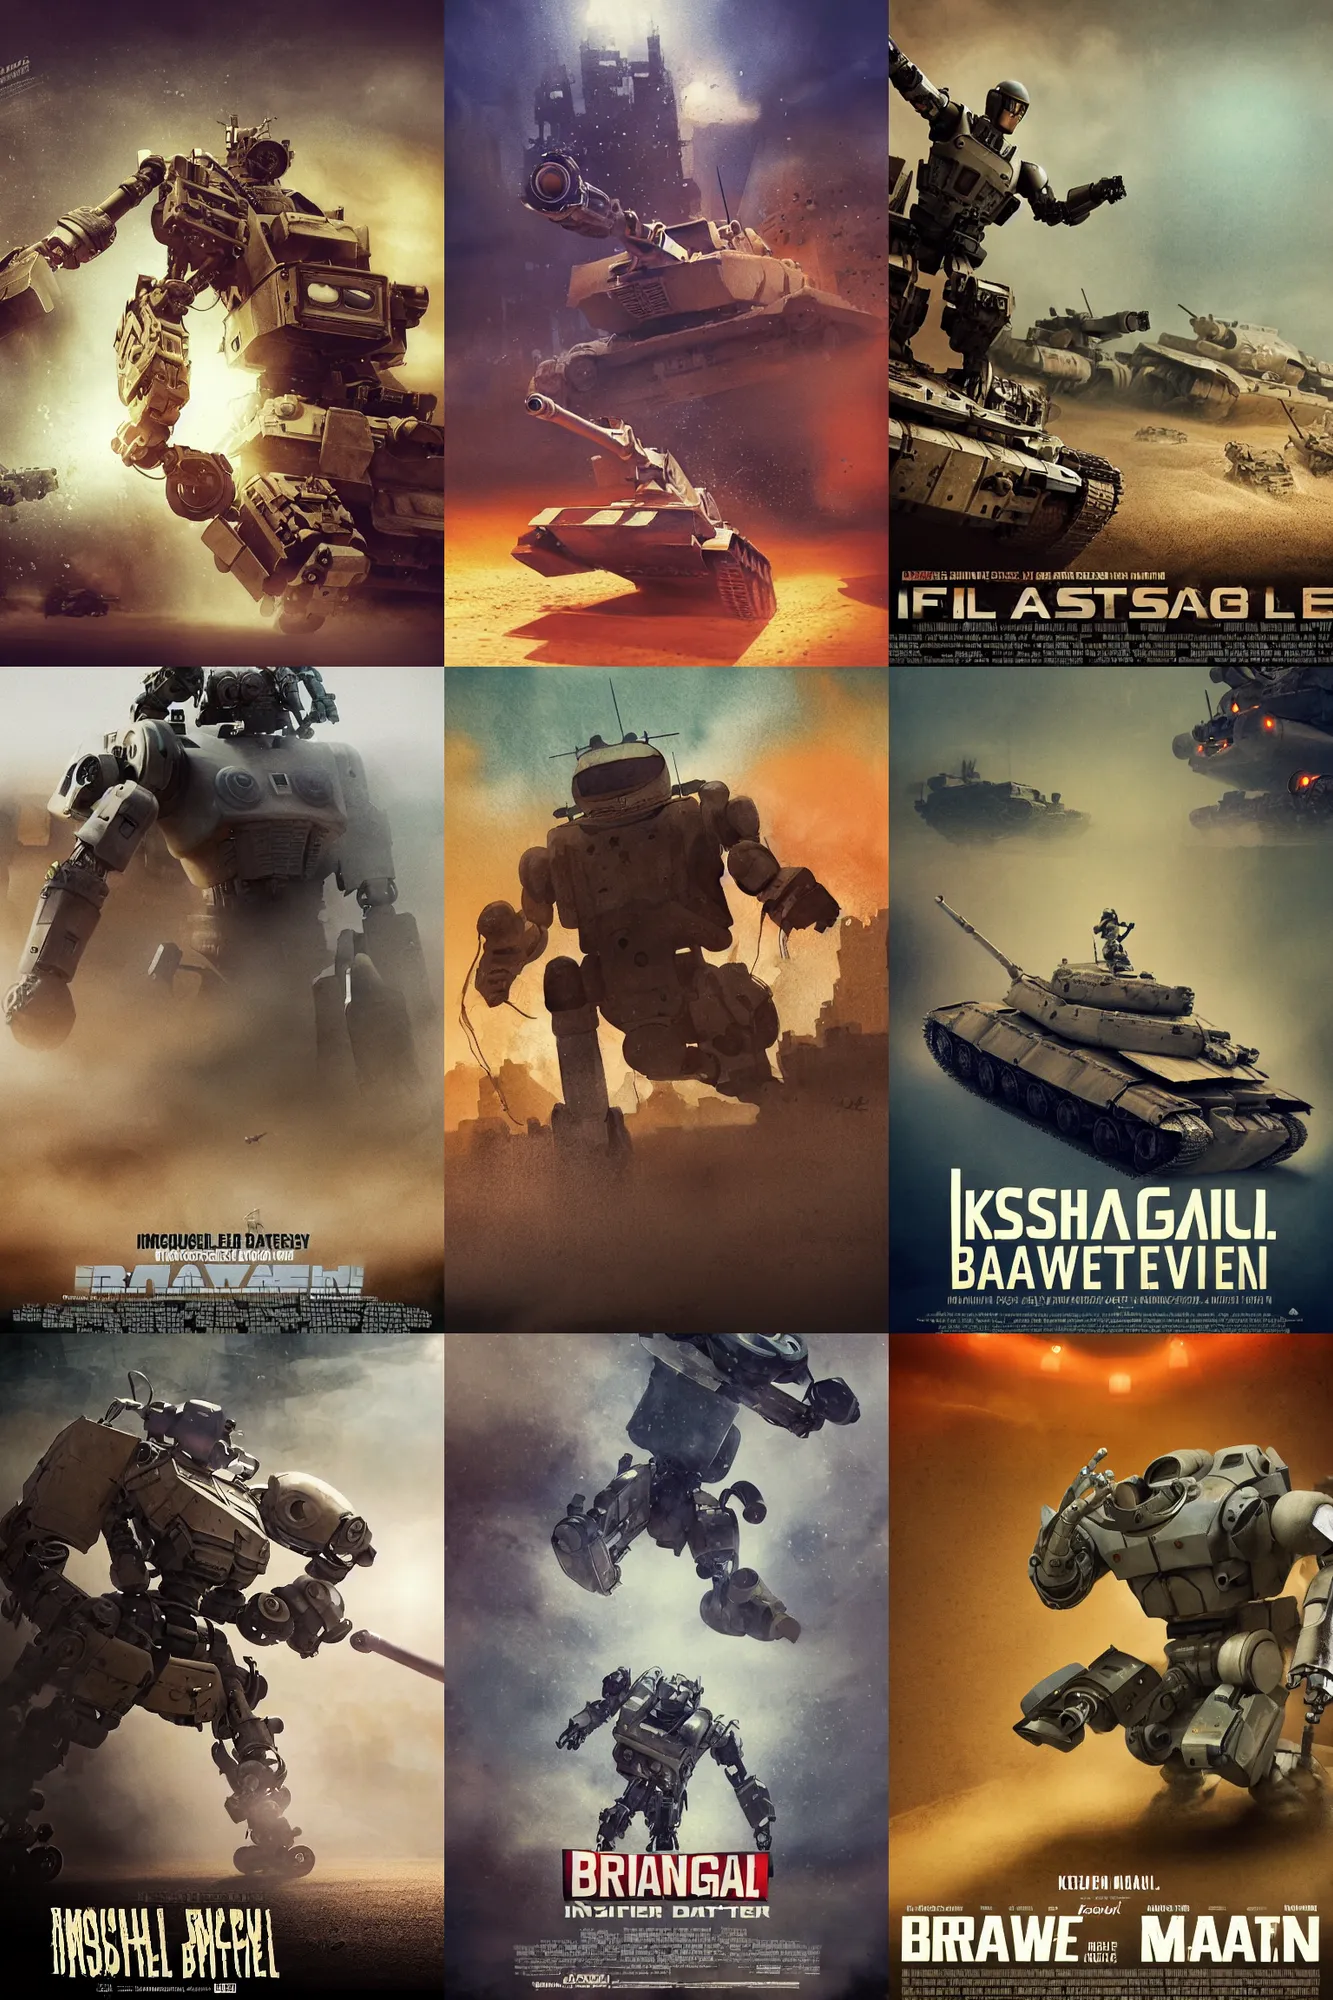 Prompt: incredible movie poster, simple watercolor, fish eye lens, curvilinear perspective, movie scene close up broken Kusanagi tank battle, brown mud, dust, tank with legs, robot arm, ripped to shreds, emotional face shot ,light rain, glowing atari sign, japanese advertisements on buildings, hd, 4k, remaster, dynamic camera angle, deep 3 point perspective, fish eye, dynamic scene